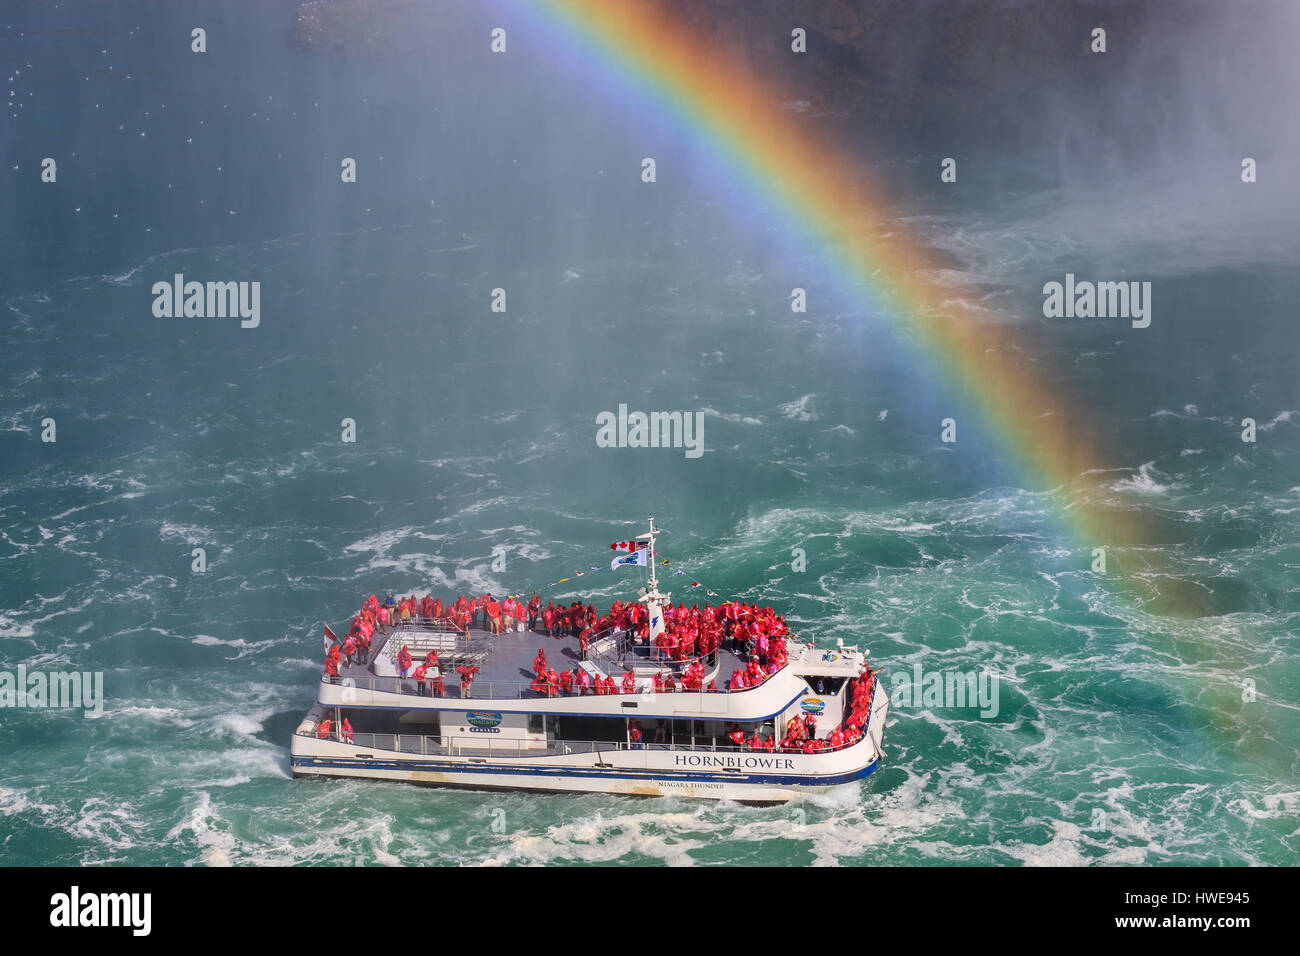 The Hornblower loaded with tourists entering the Horseshoe Falls, part of the Niagara Falls, Ontario, Canada. Stock Photo